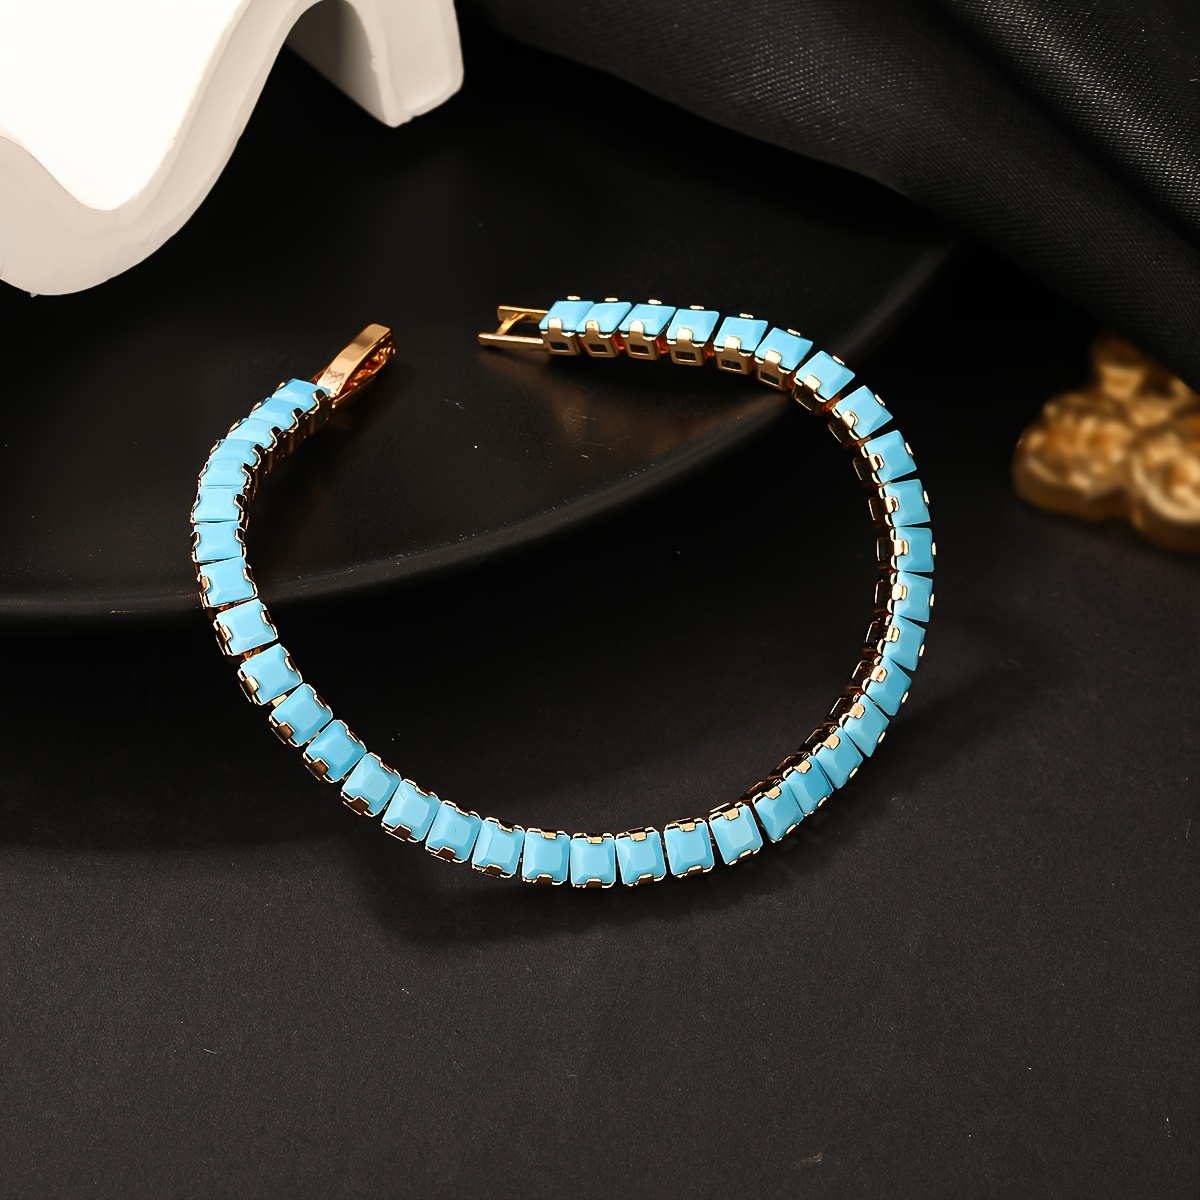 

Pretty Blue Turquoise Inlaid Bracelet Copper Jewelry Elegant Leisure Style Adjustable Female Hand Chain